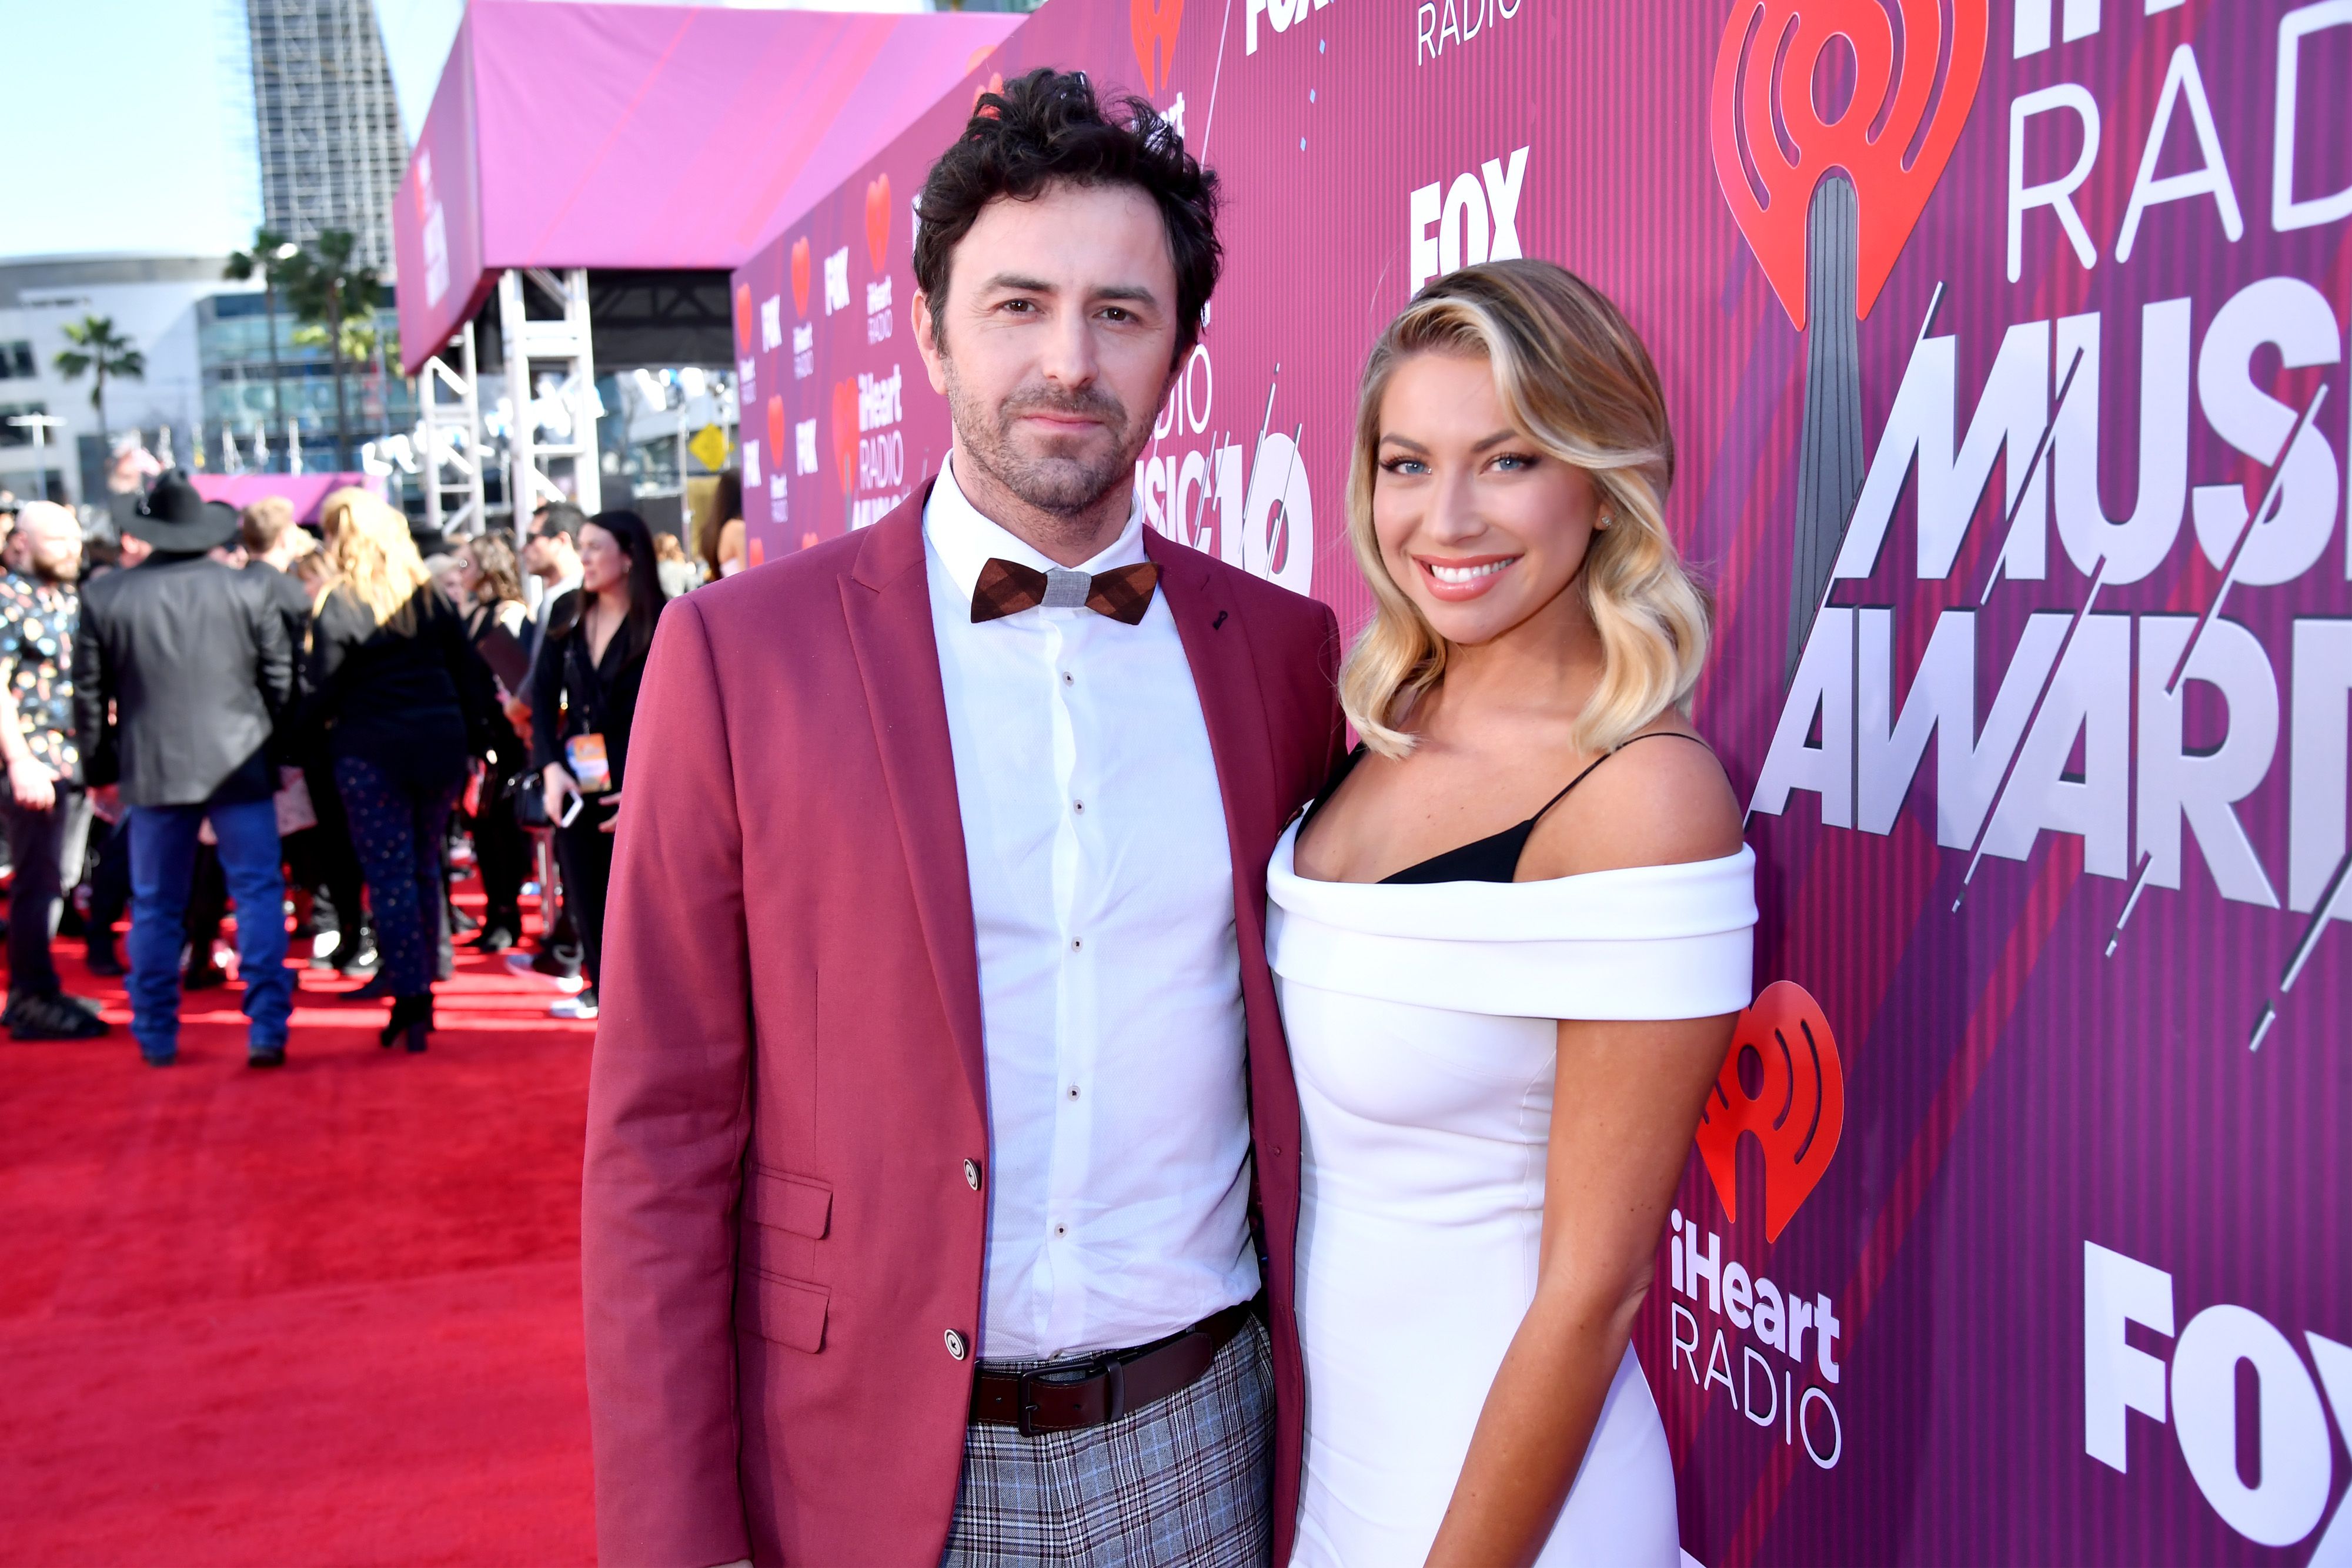 Beau Clark and Stassi Schroeder at the 2019 iHeartRadio Music Awards at the Microsoft Theater in Los Angeles, California | Photo: Jeff Kravitz/2019 iHeartMedia